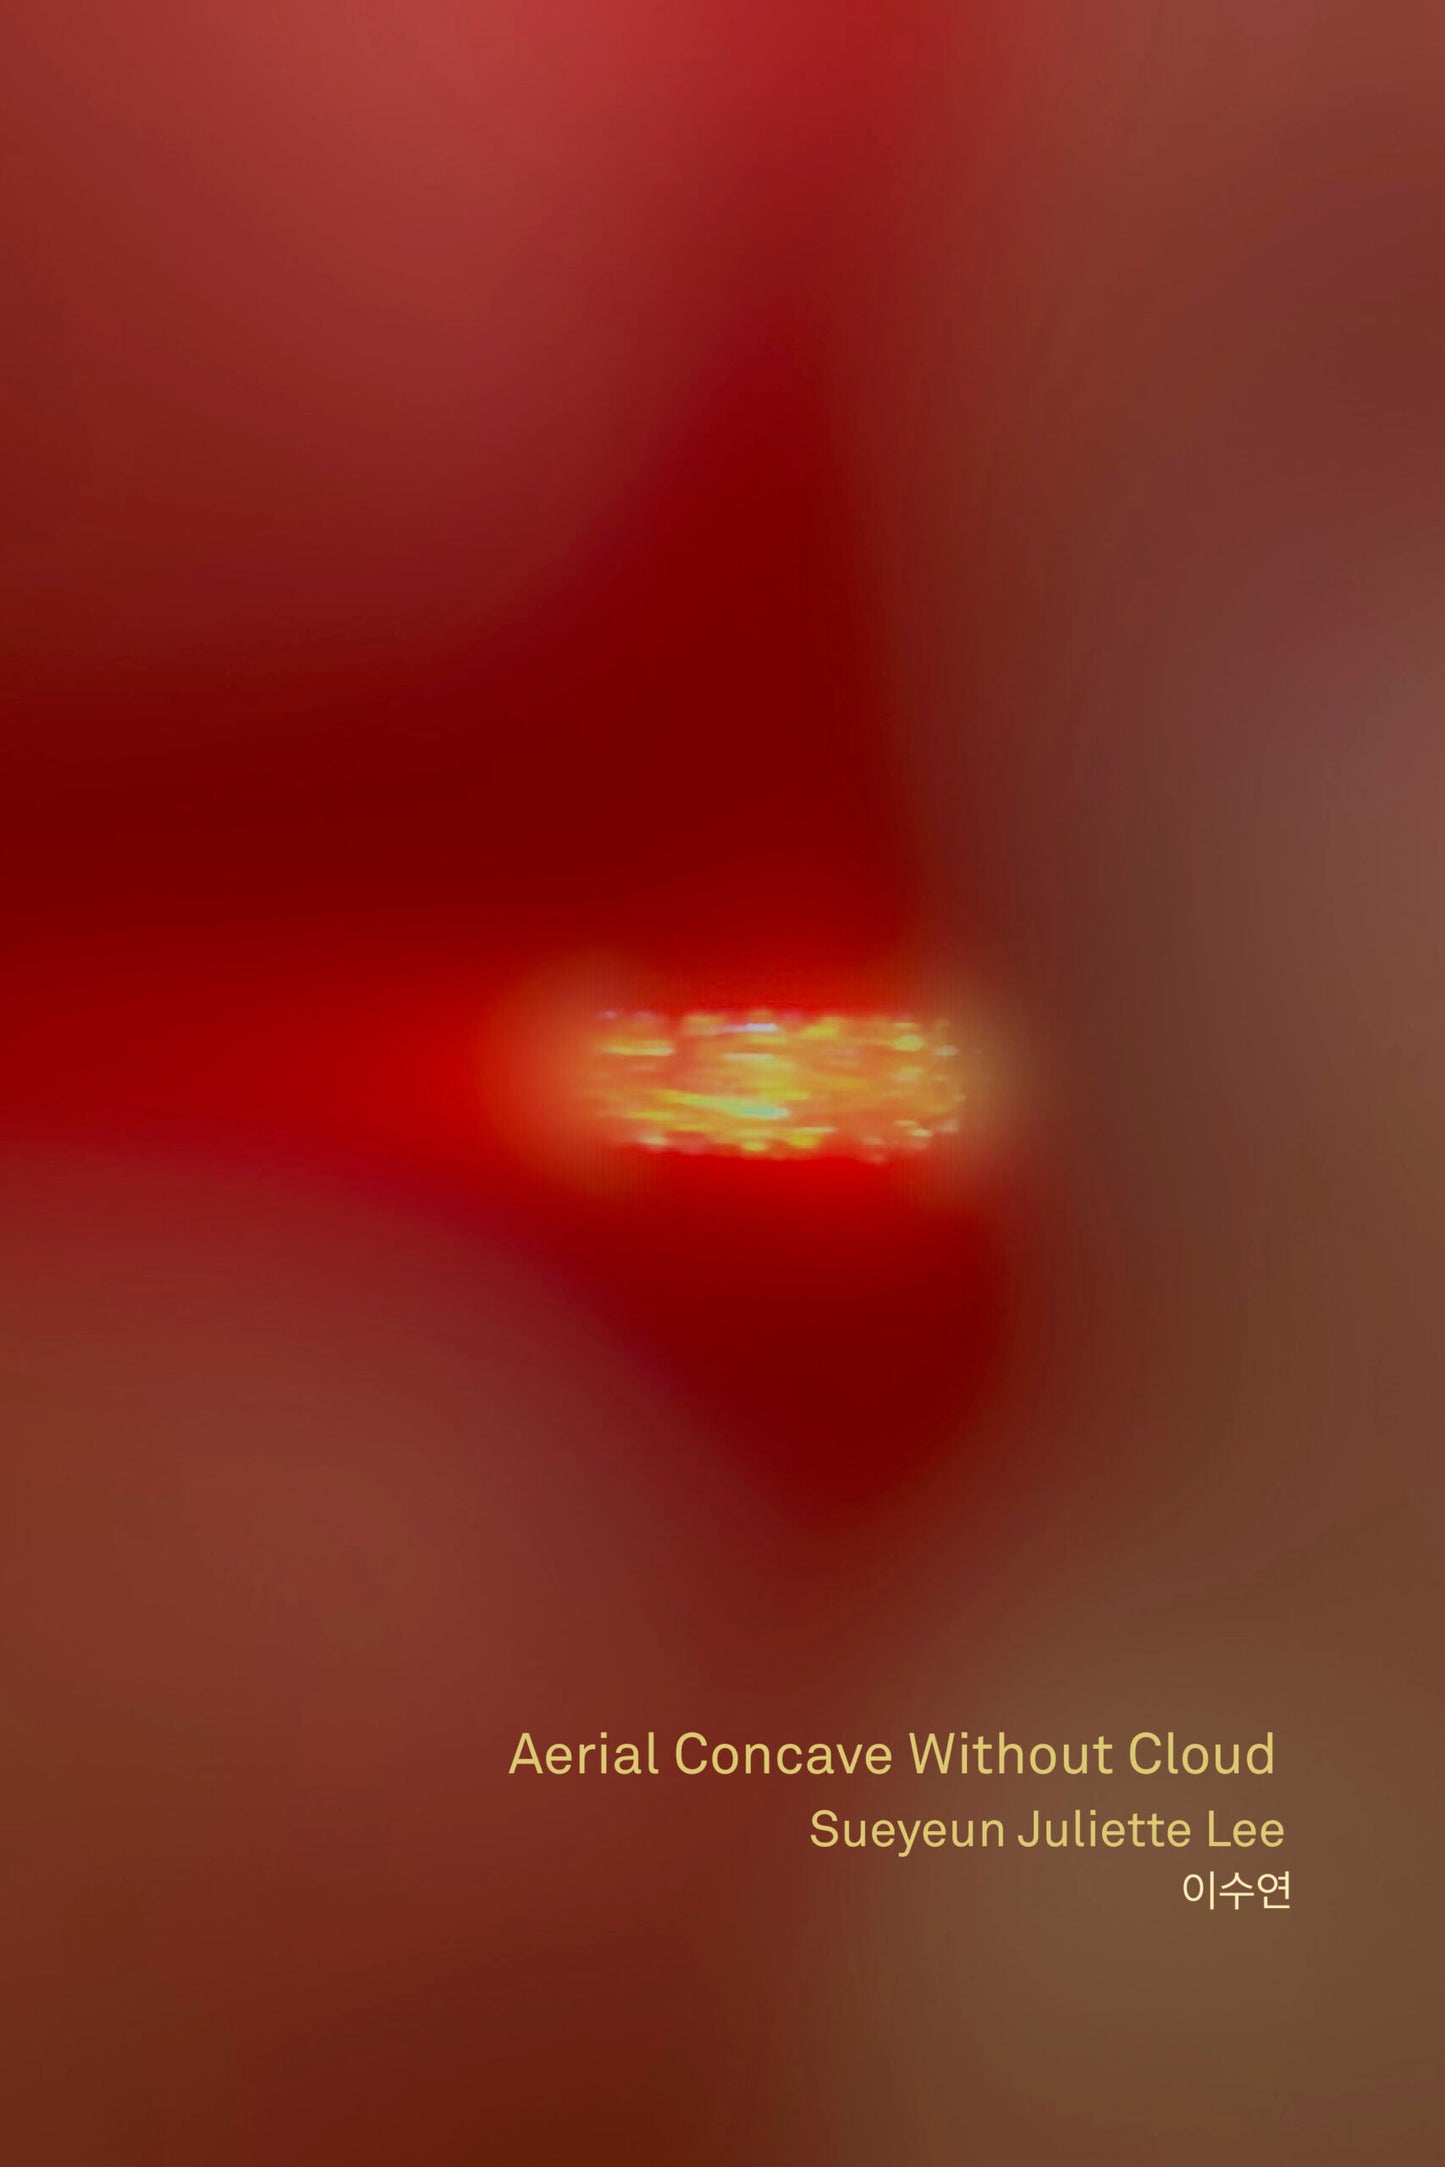 Aerial Concave Without Cloud